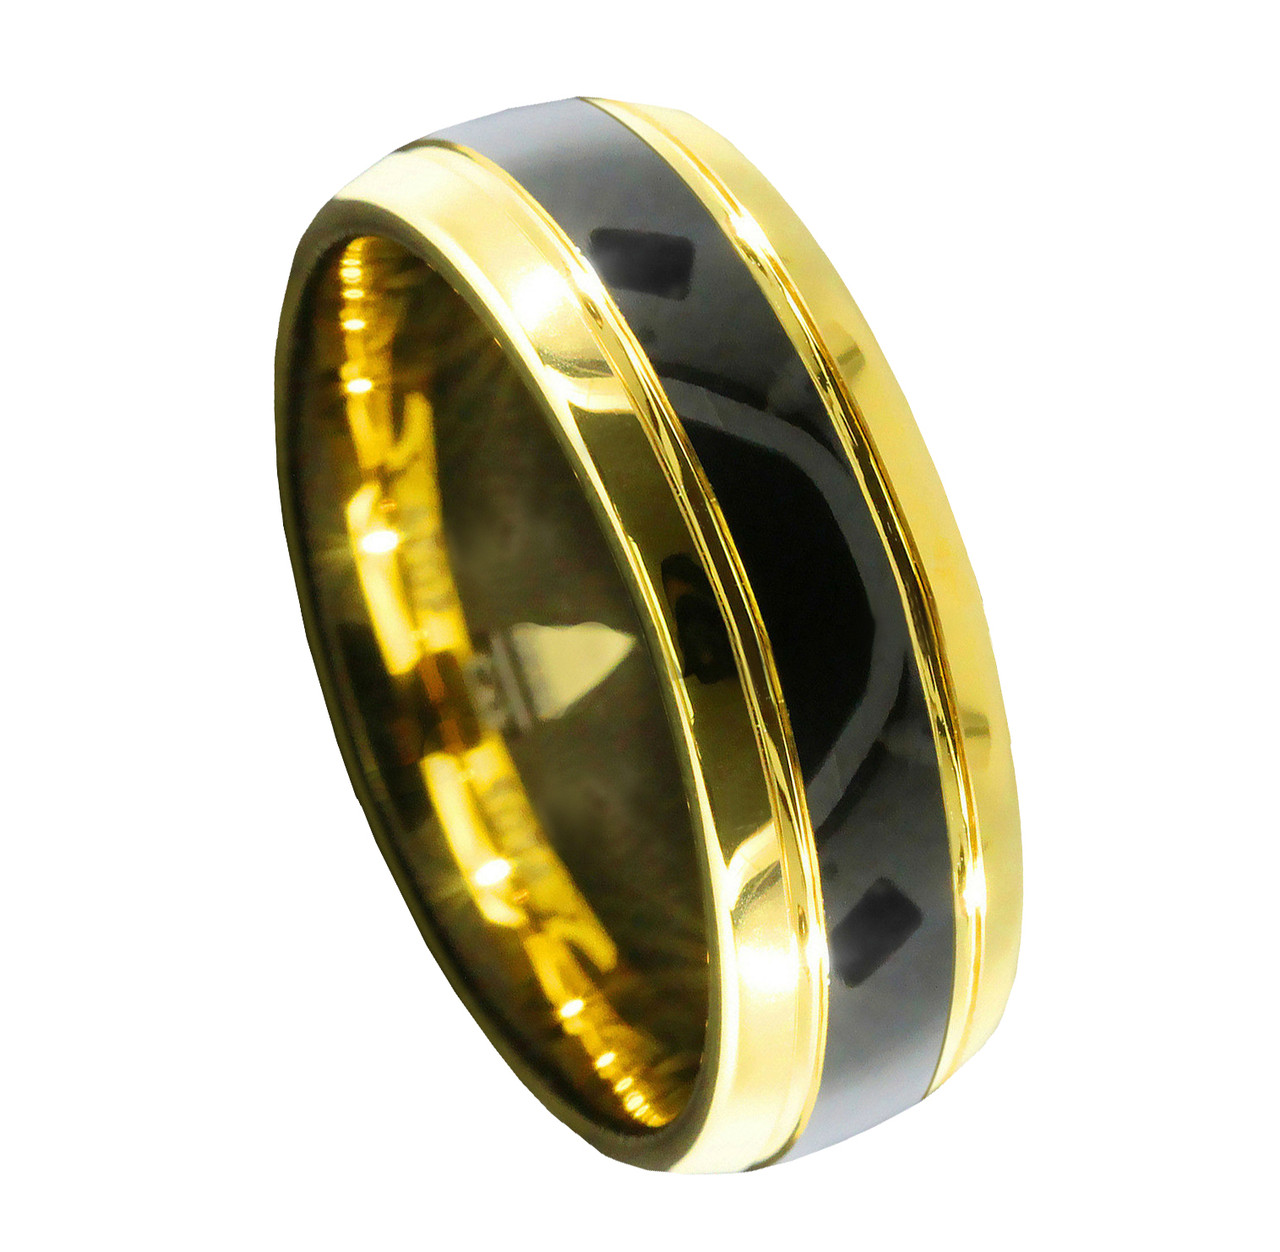 (8mm) Unisex or Men's Gold and Black Dome Gunmetal Tungsten Carbide Wedding Ring Band